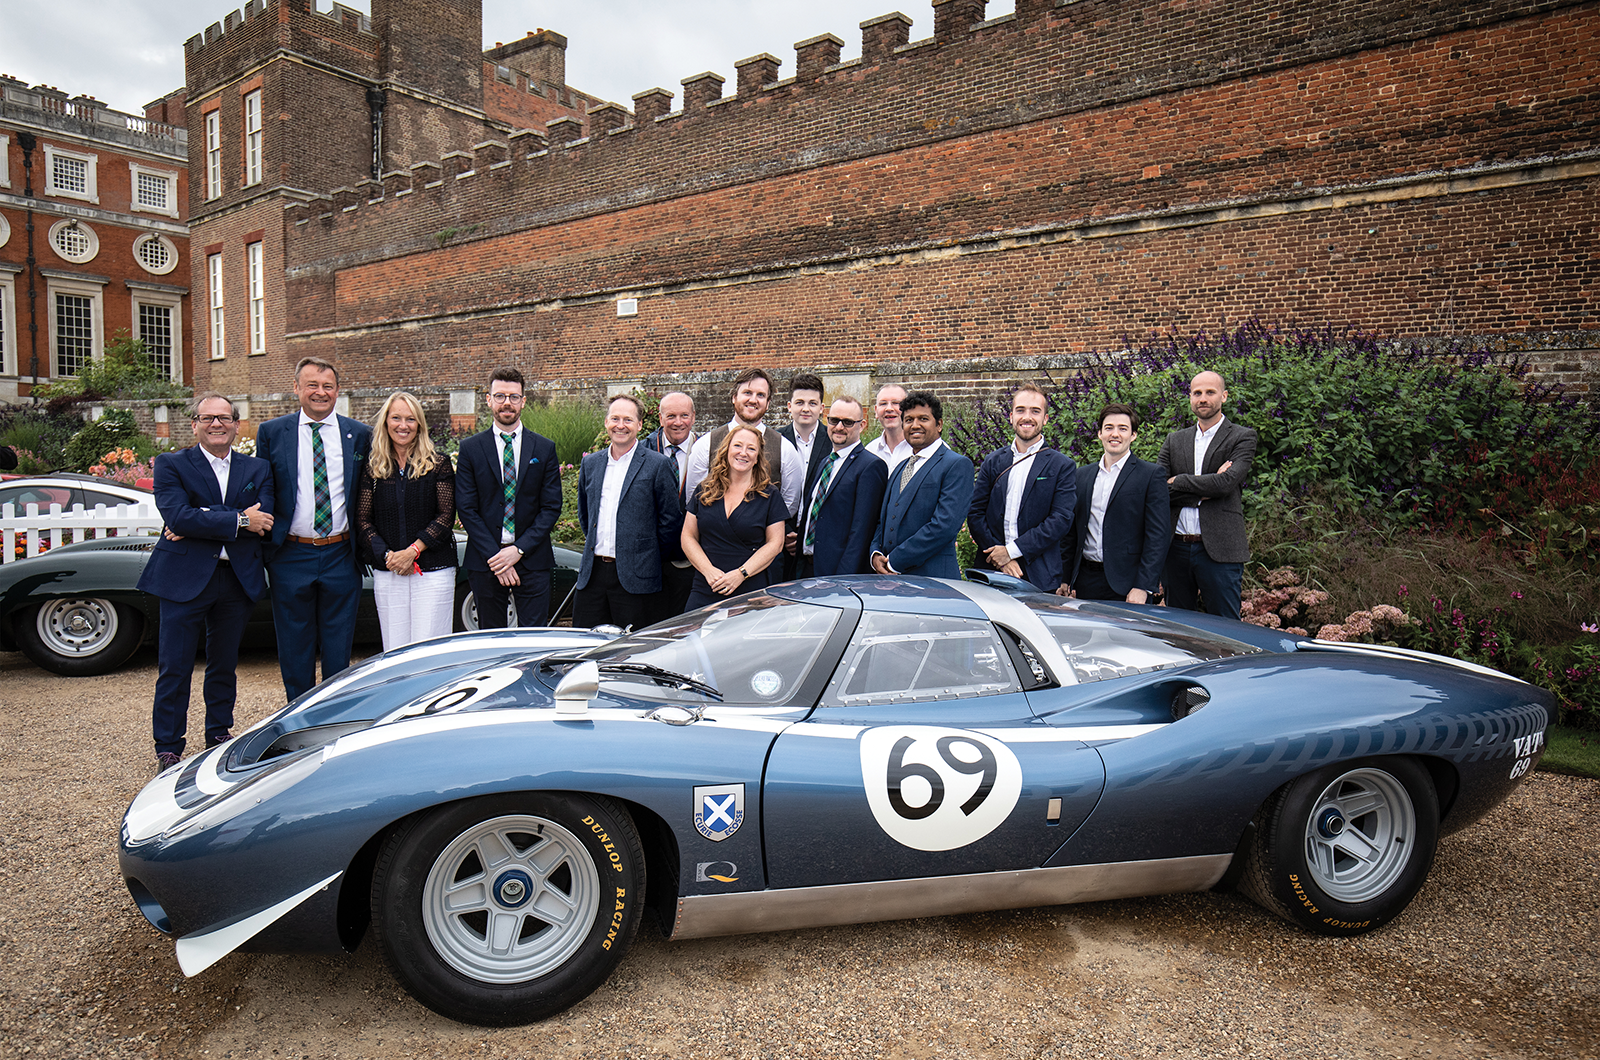 Classic & Sports Car – Norman Dewis to be honoured at the NEC show